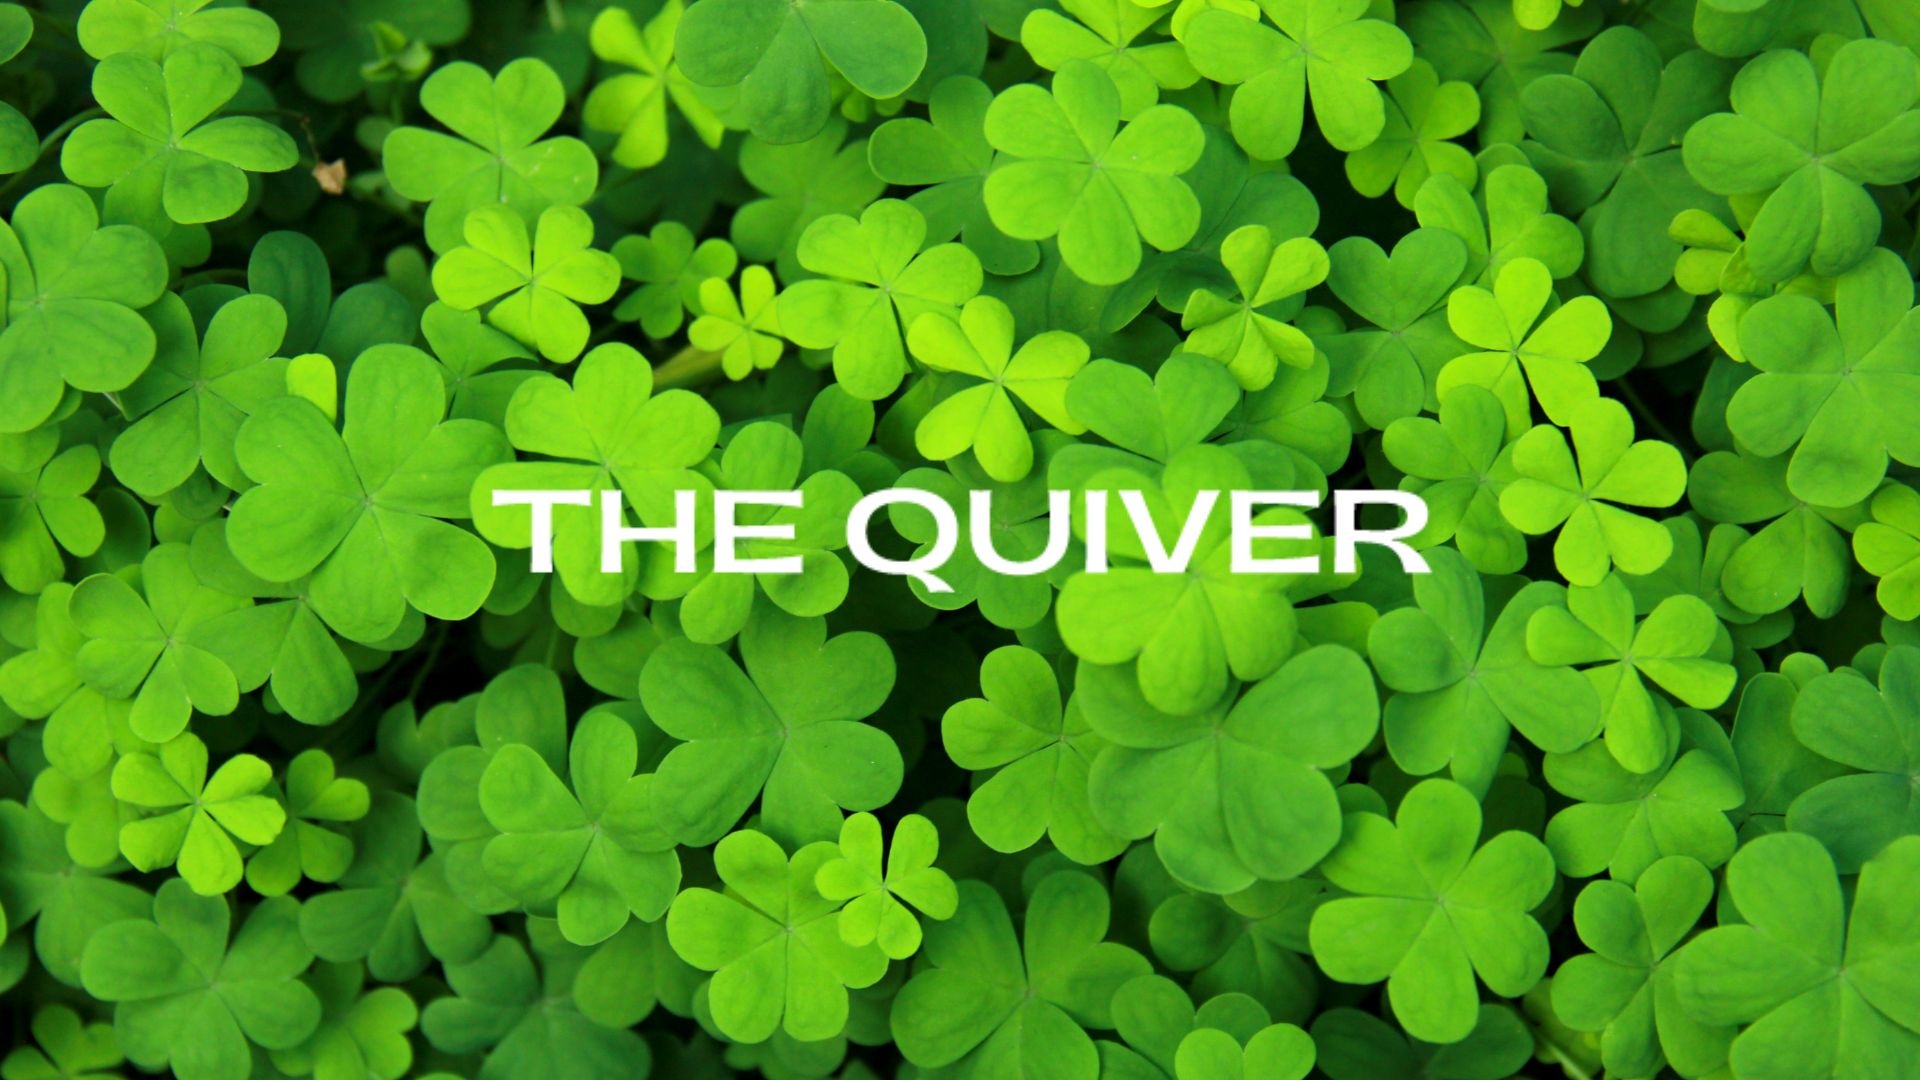 Saint Patrick's Day Shoot at the Quiver Archery Range - field of clovers with the quiver logo in the middle